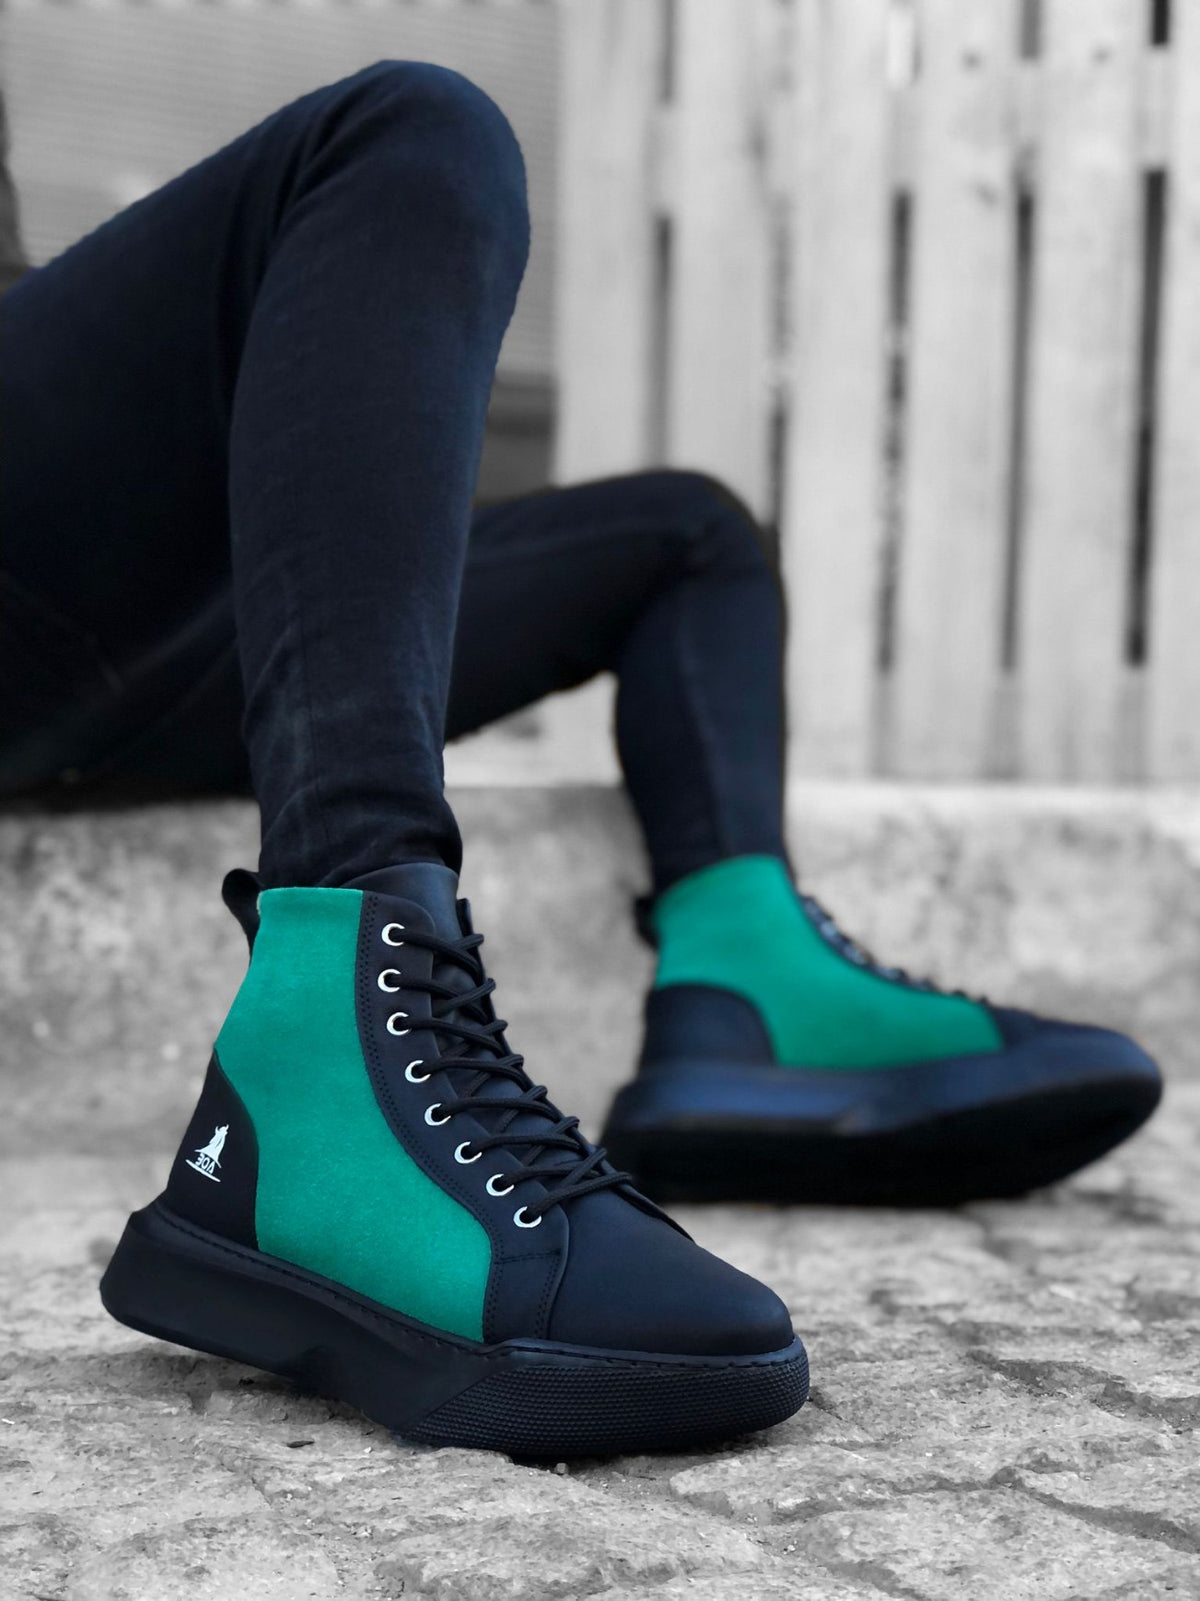 BA0256 Lace-up Men's High Sole Black Green Sole Sports Boots - STREETMODE™